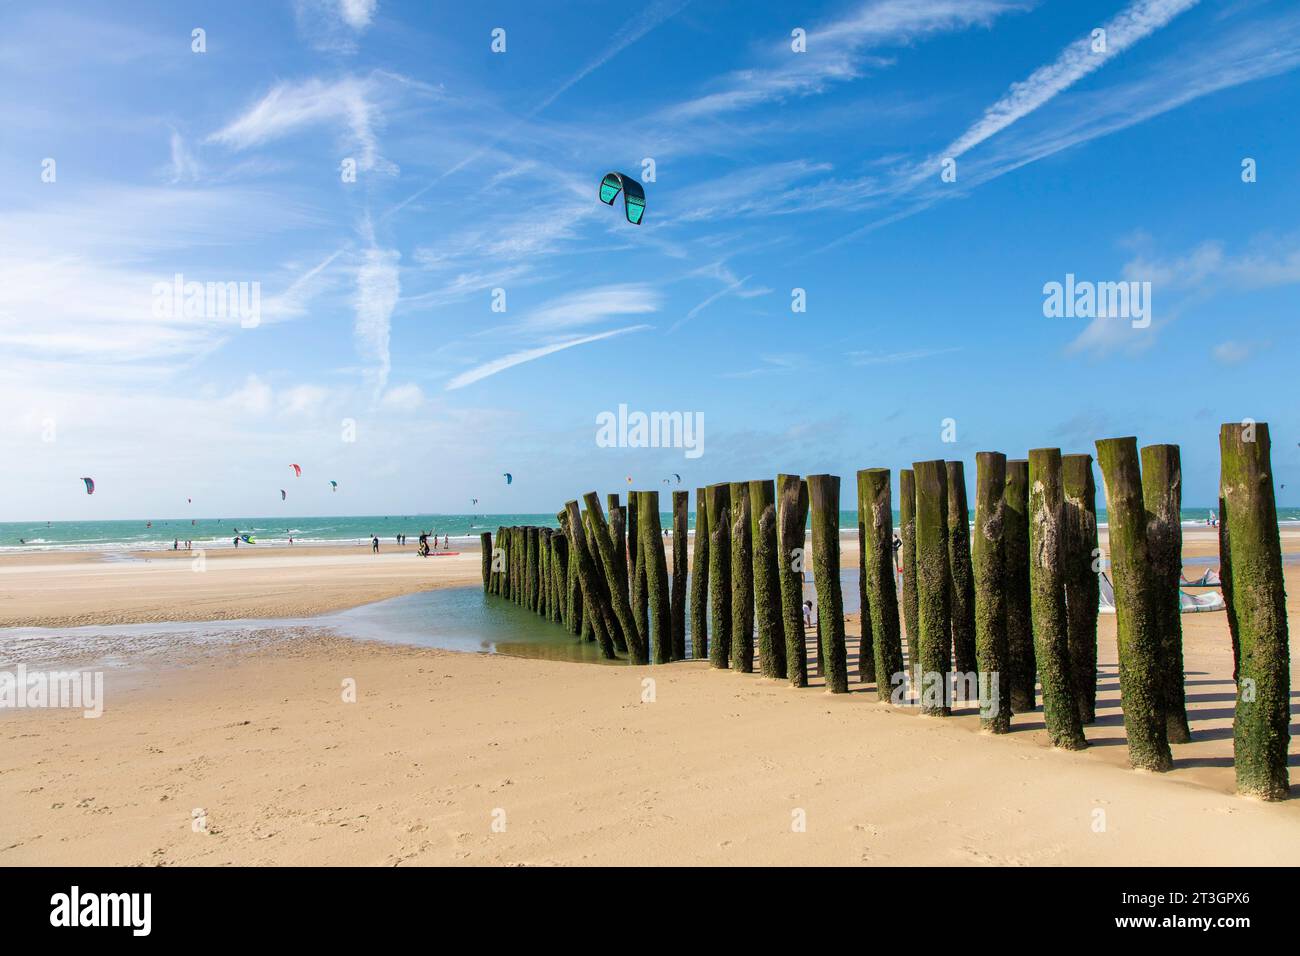 France, Pas de Calais, Wissant, breakwater stakes protect the dune from erosion Stock Photo